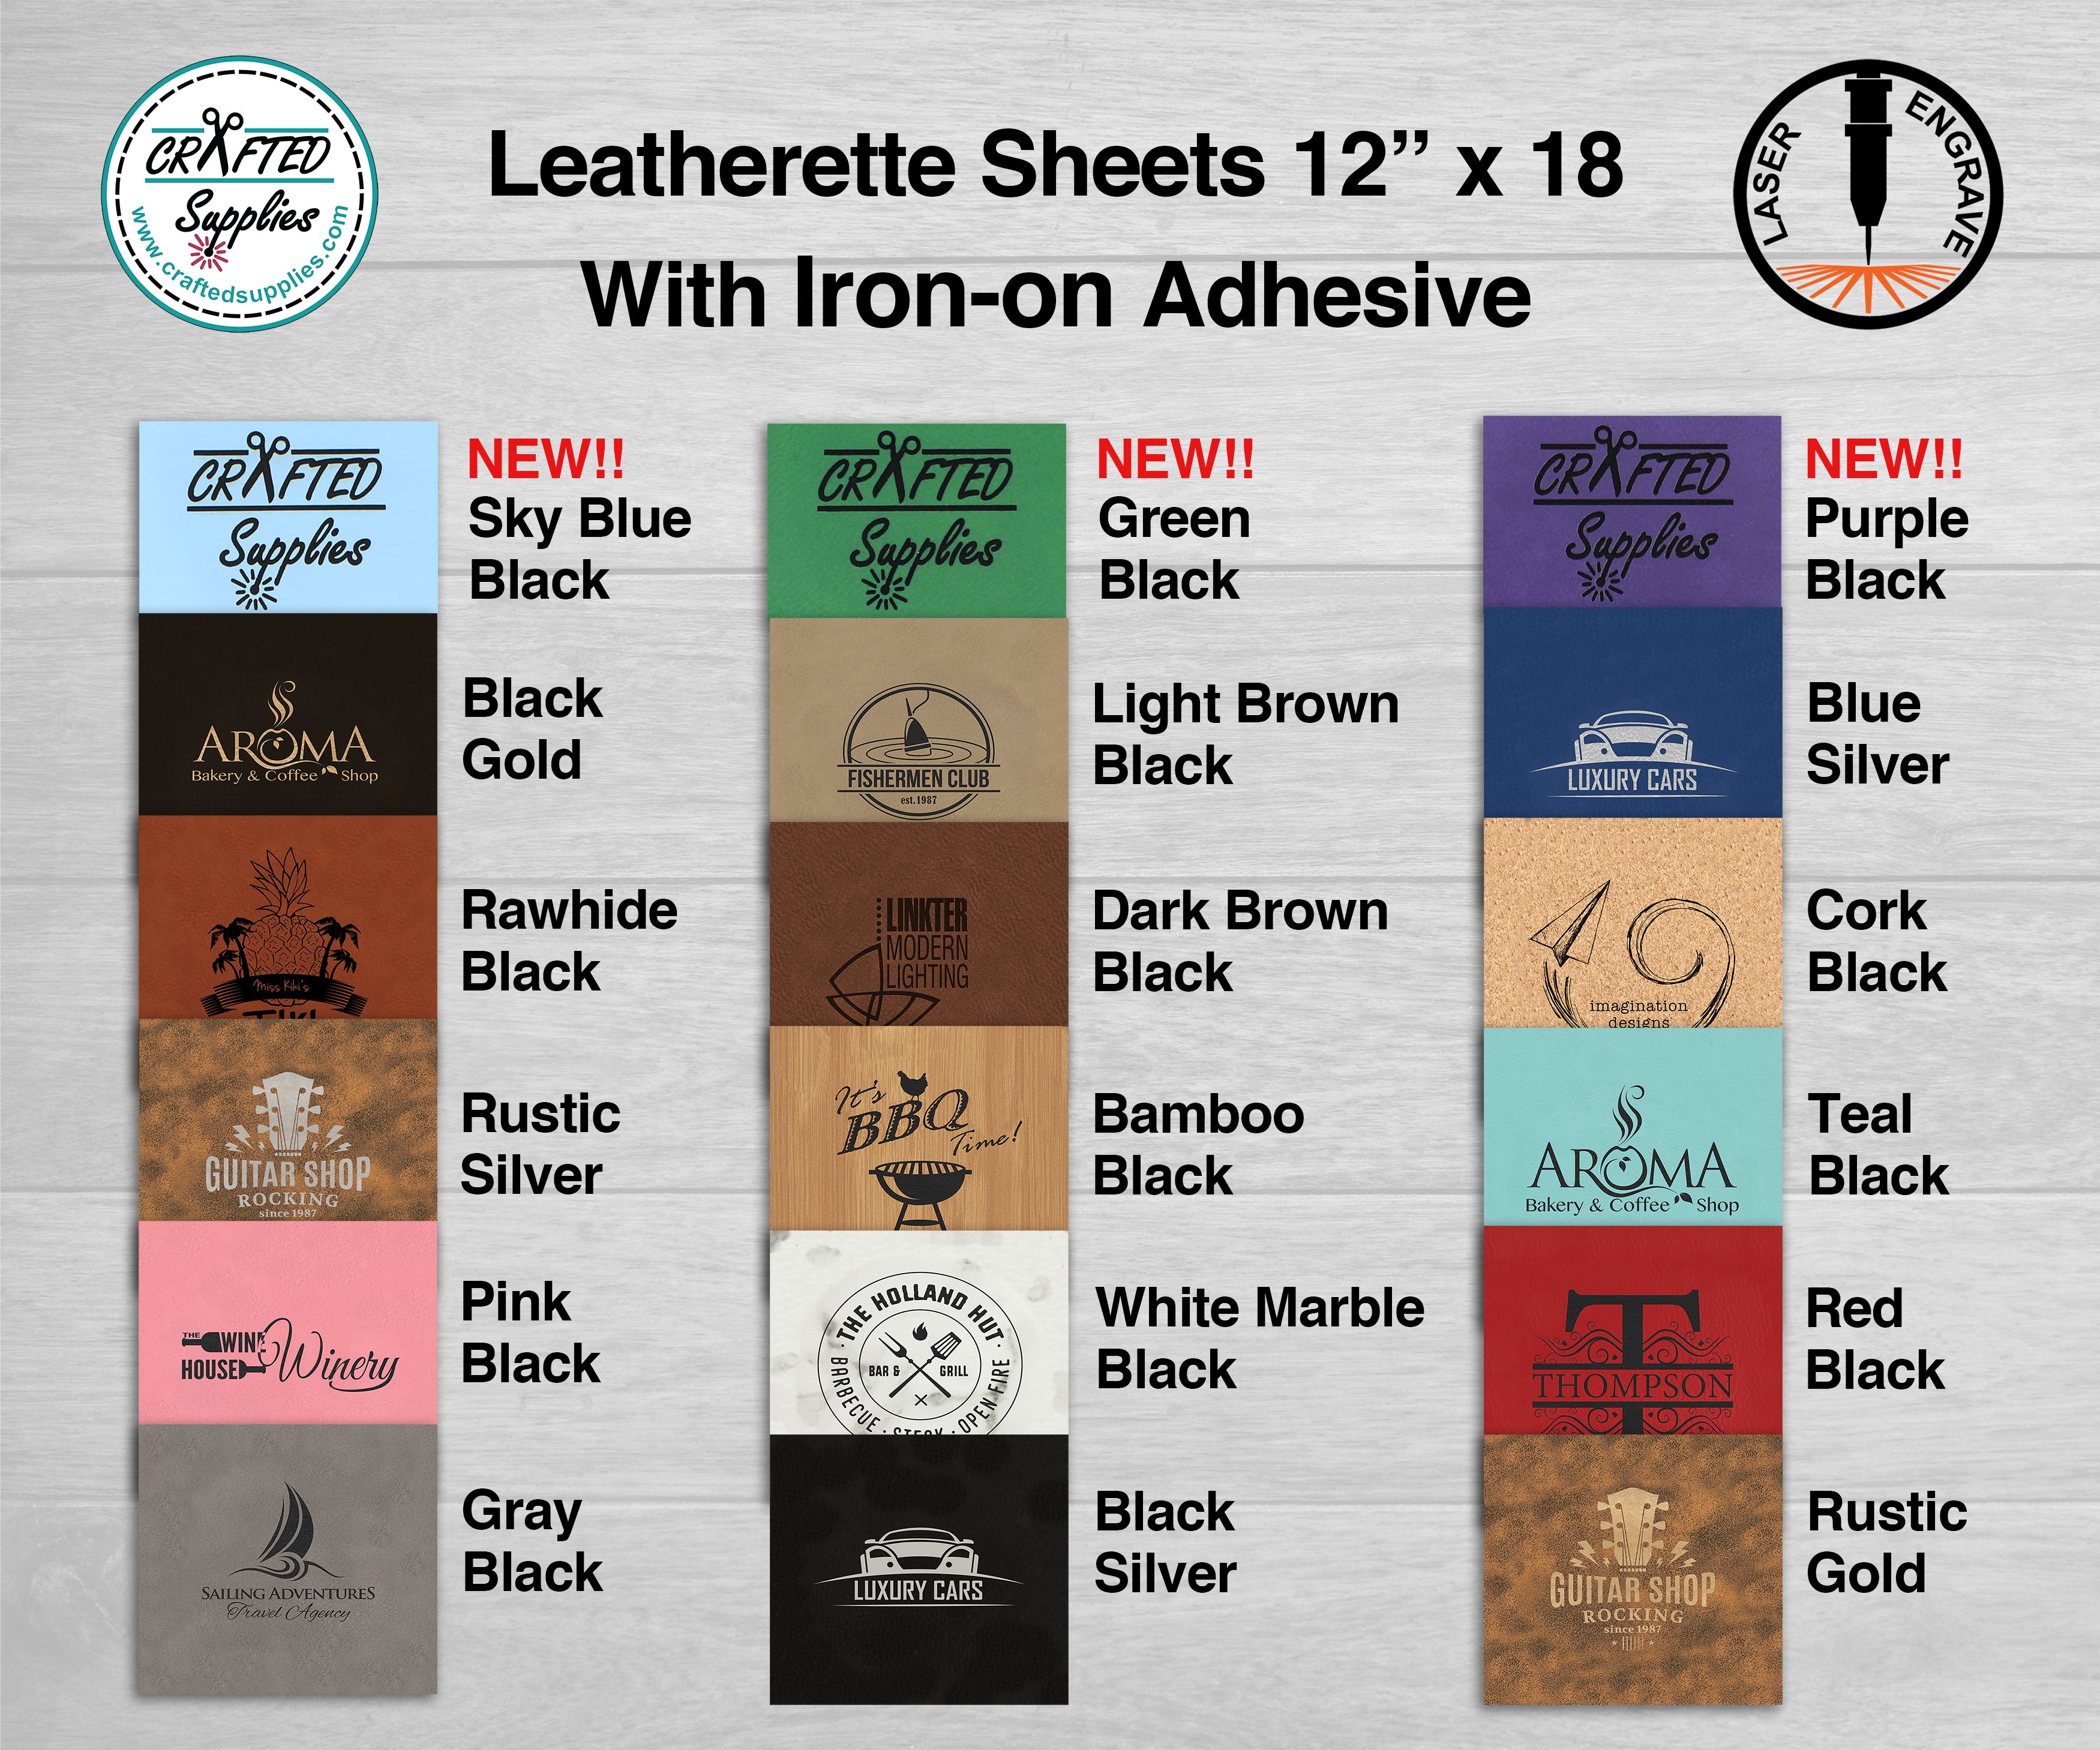 Leatherette Sheet With Iron-on Adhesive 12 in x 18 in – CraftedSupplies